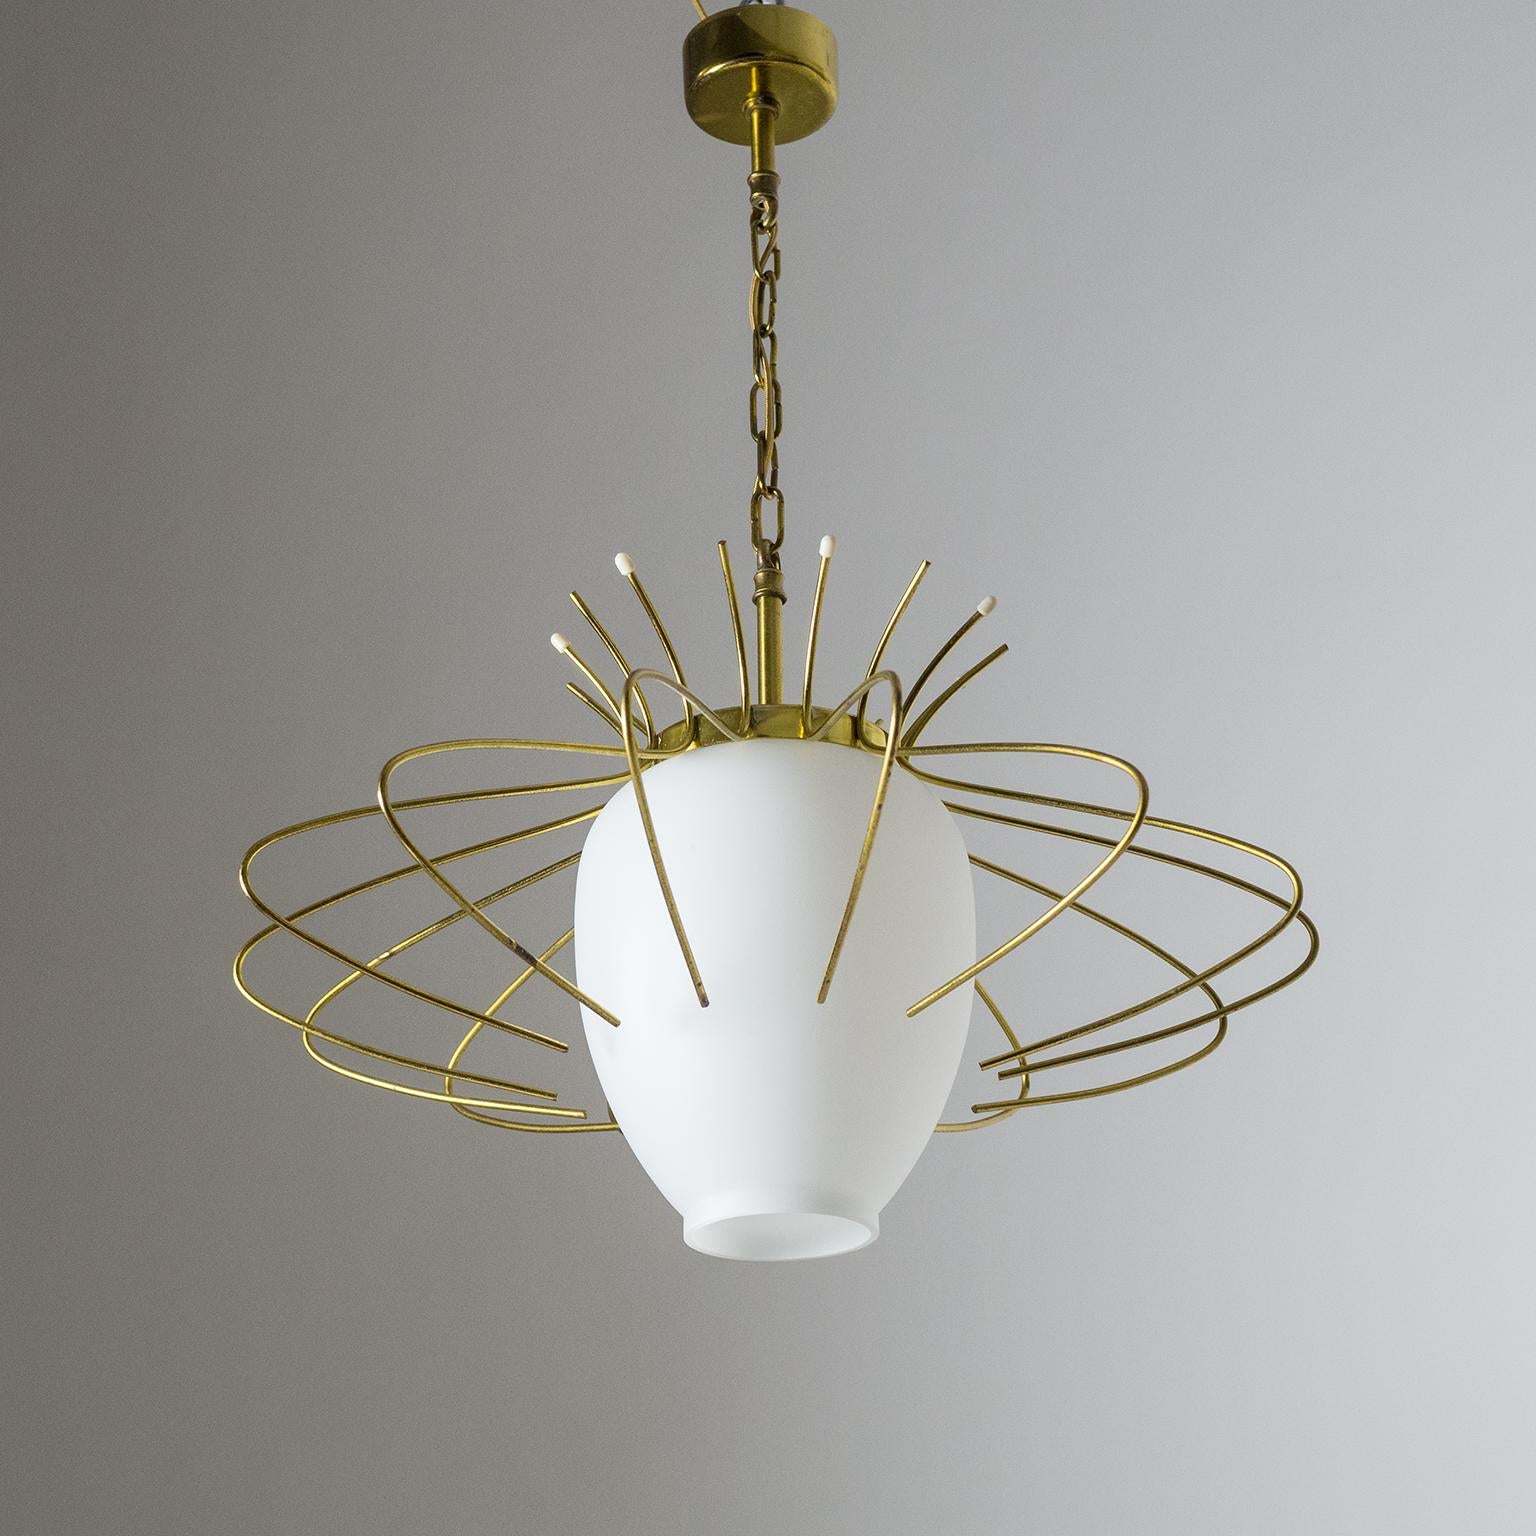 Lovely French modern pendant from the 1960s. The cased glass diffuser has a satin finish and is surrounded by a delicate brass wire structure. Very good original condition with a nice patina on the brass. One brass and ceramic E27 socket with new